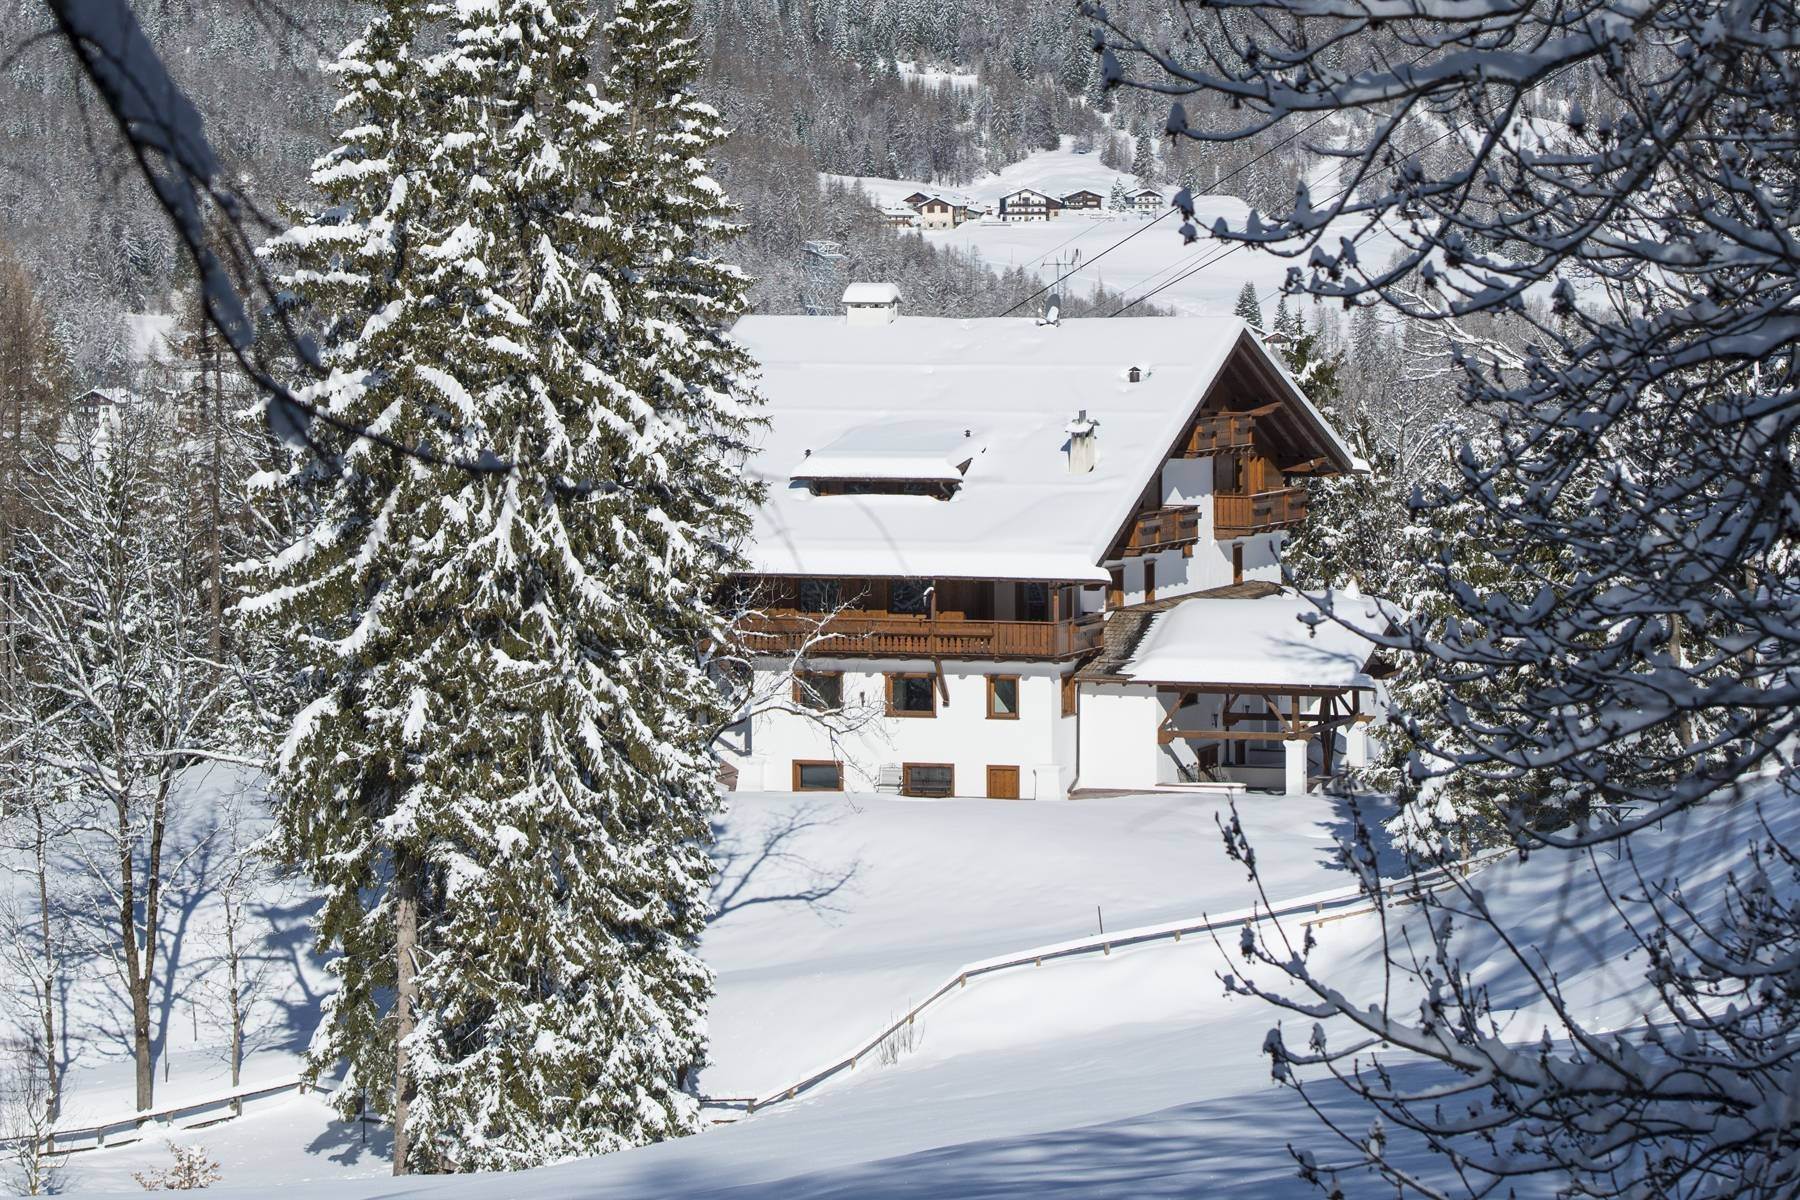 Single Family Homes for Sale at Charming chalet nestled in the Dolomites Cortina D'Ampezzo, Belluno Italy